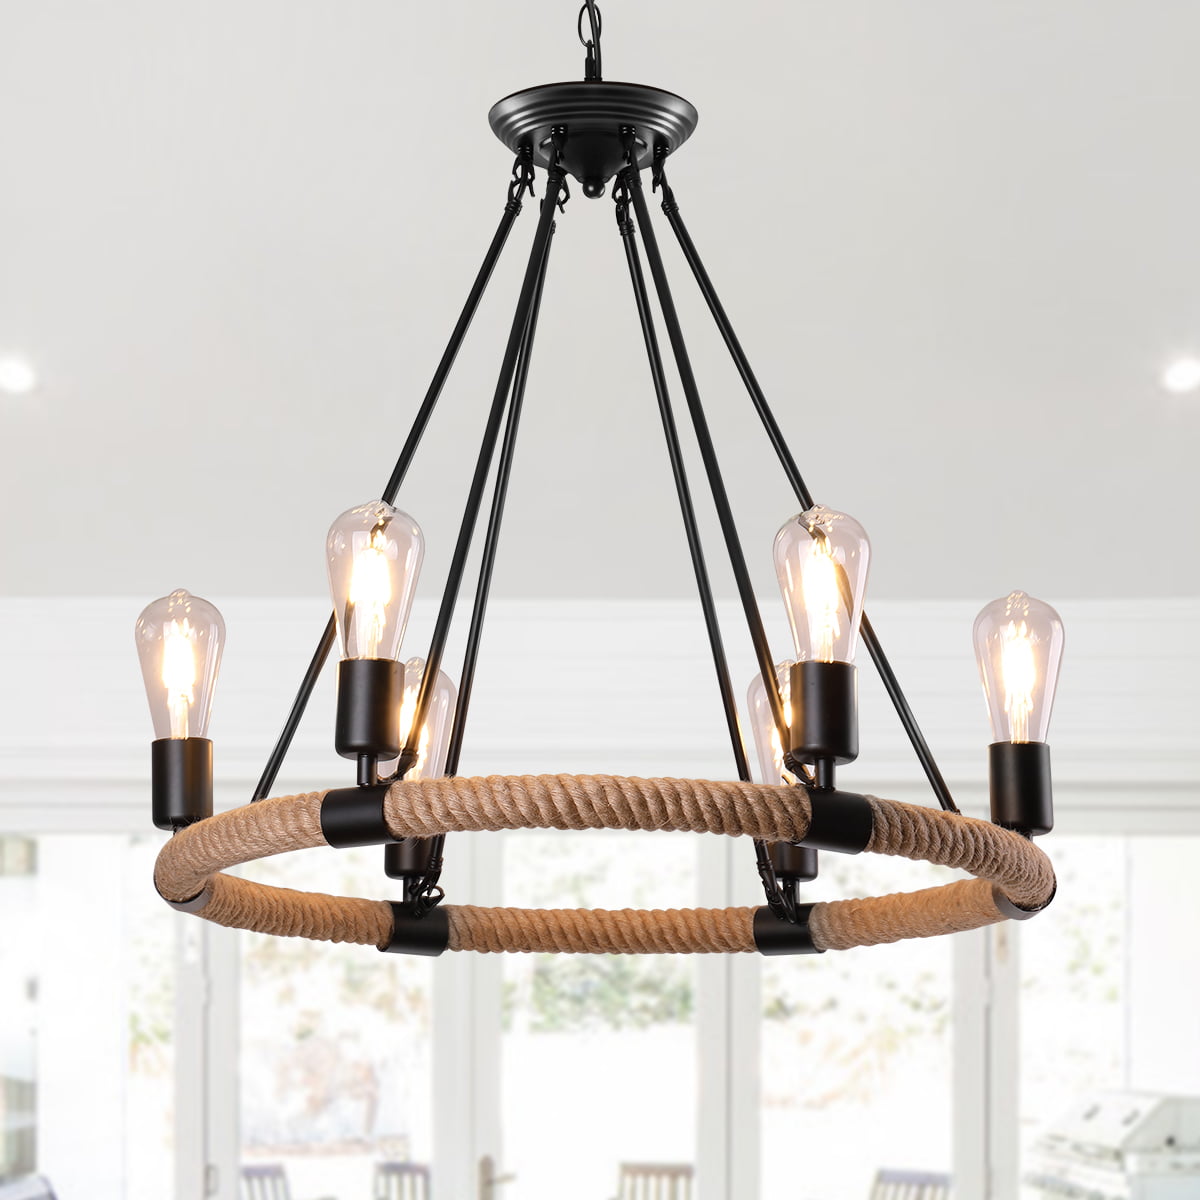 Farmhouse Rustic Industrial Country, Country Light Fixtures For Living Room